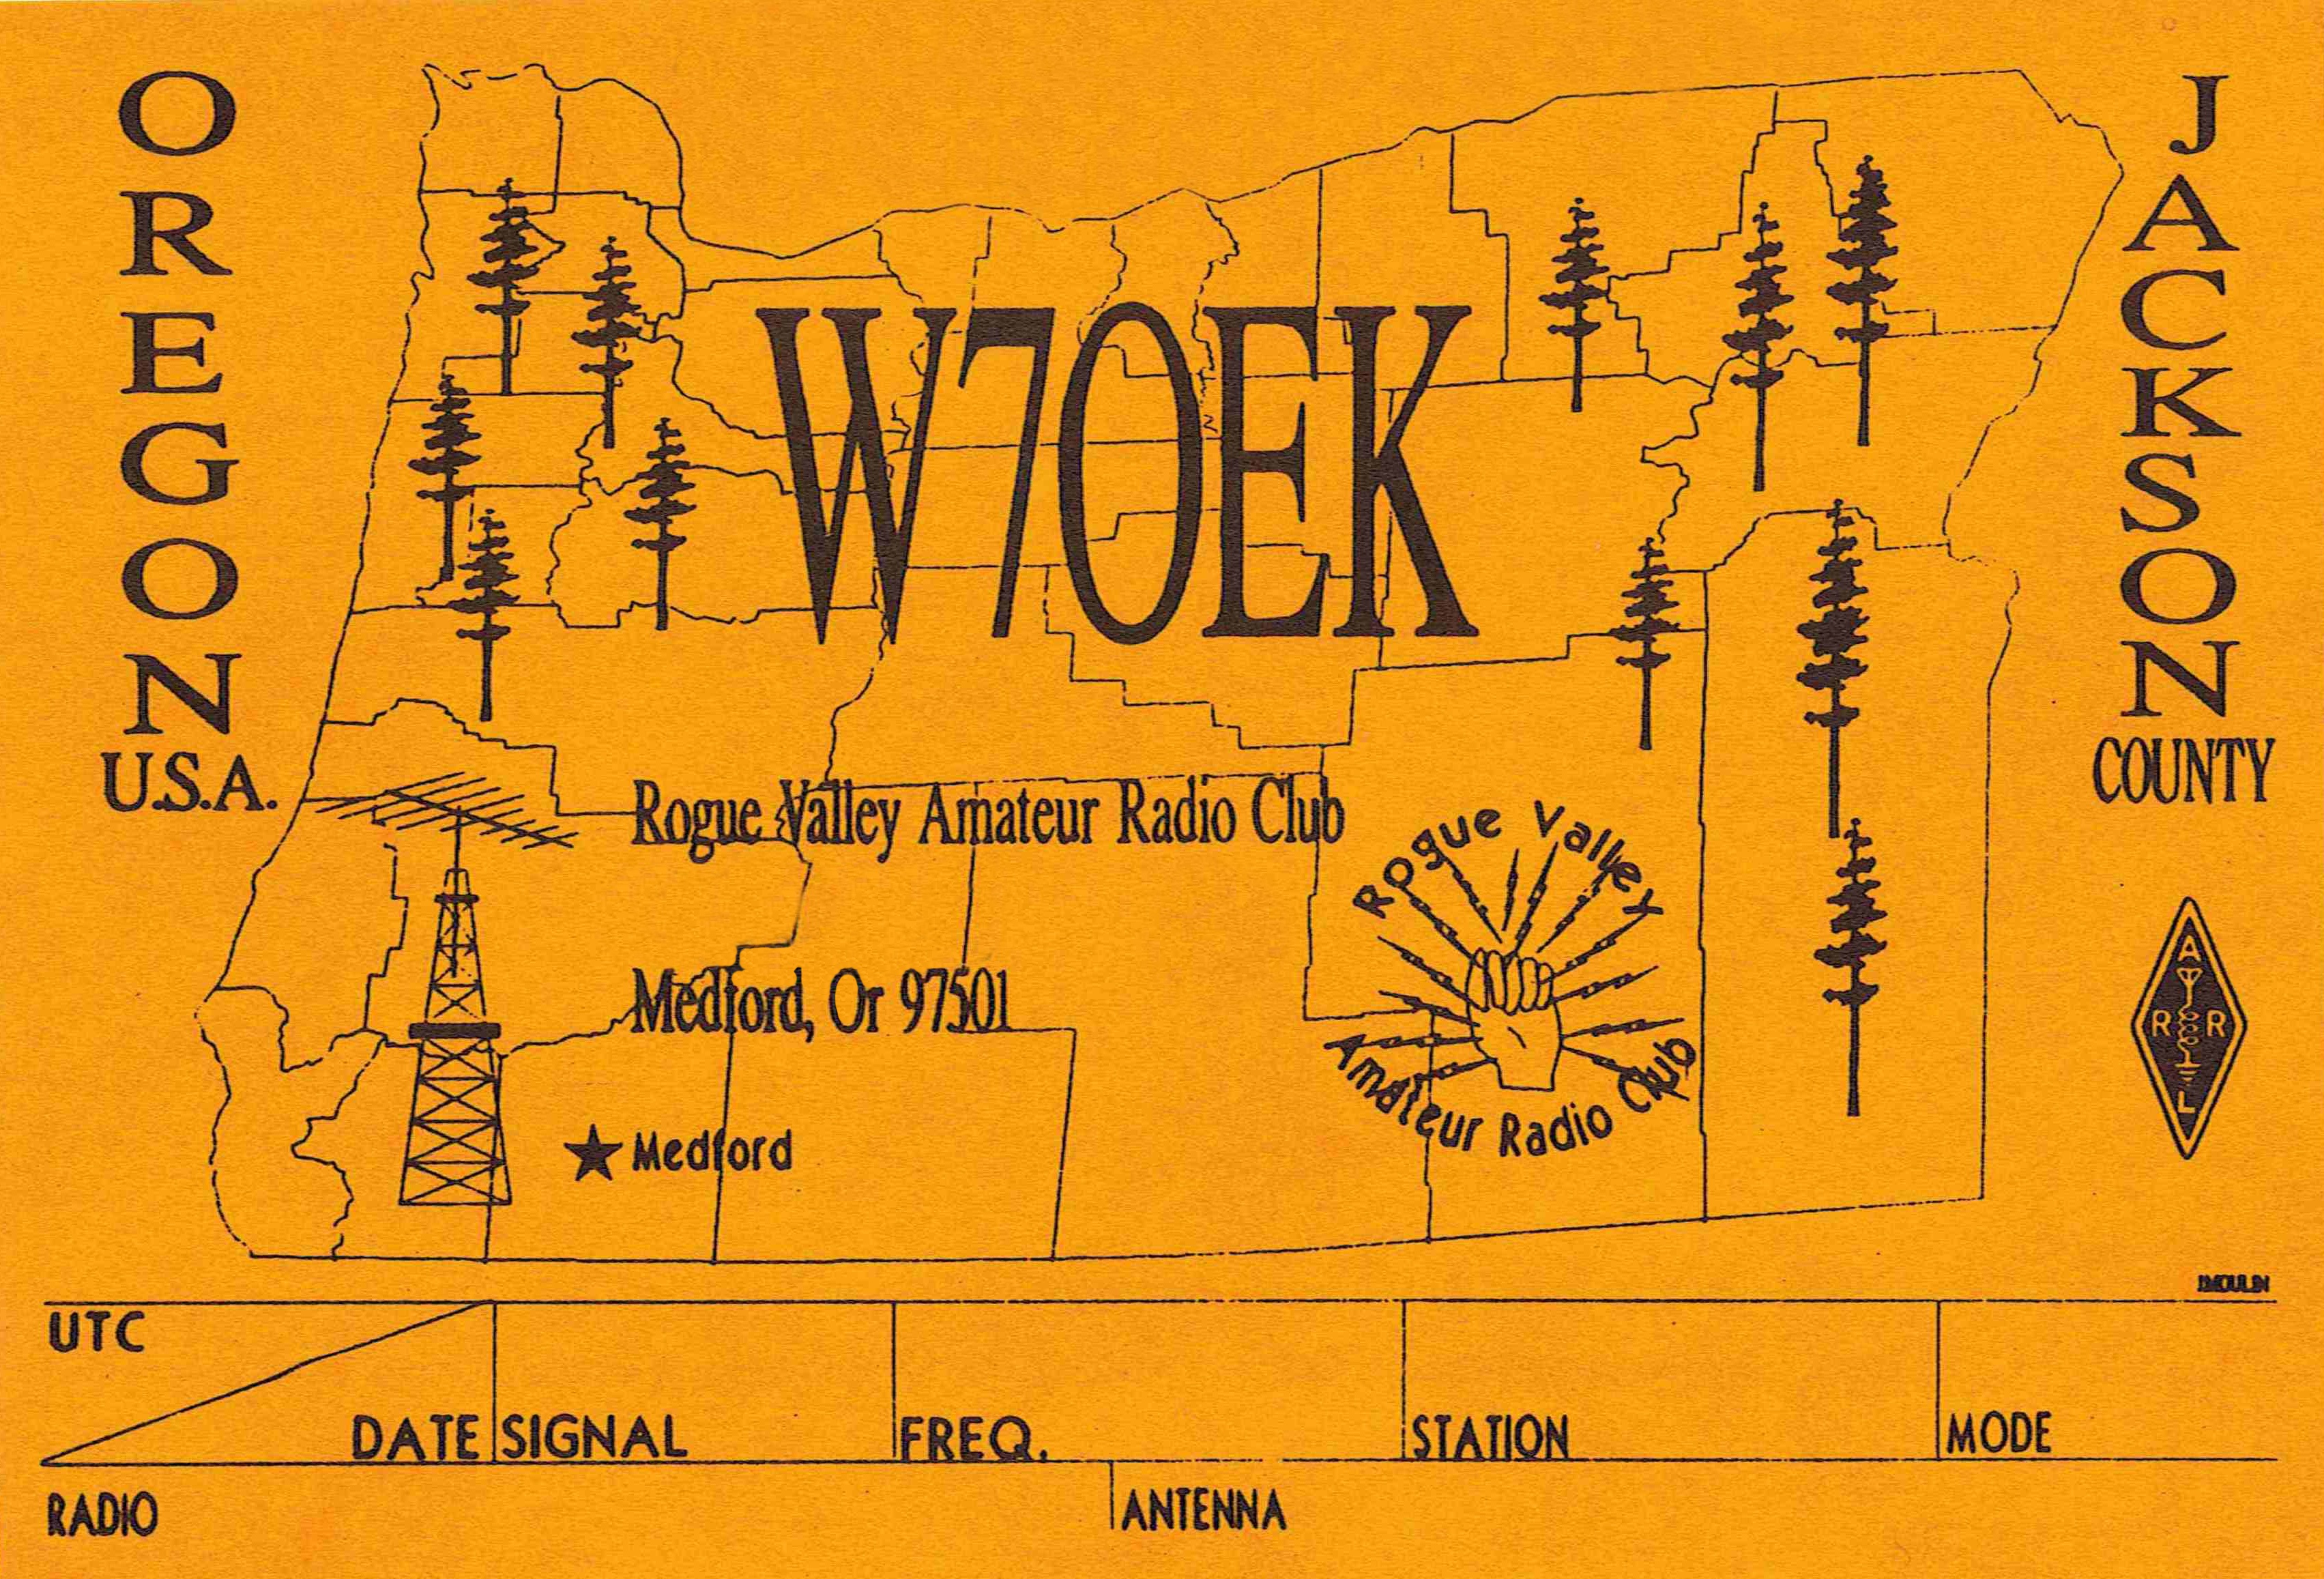 QSL Card for W7OEK